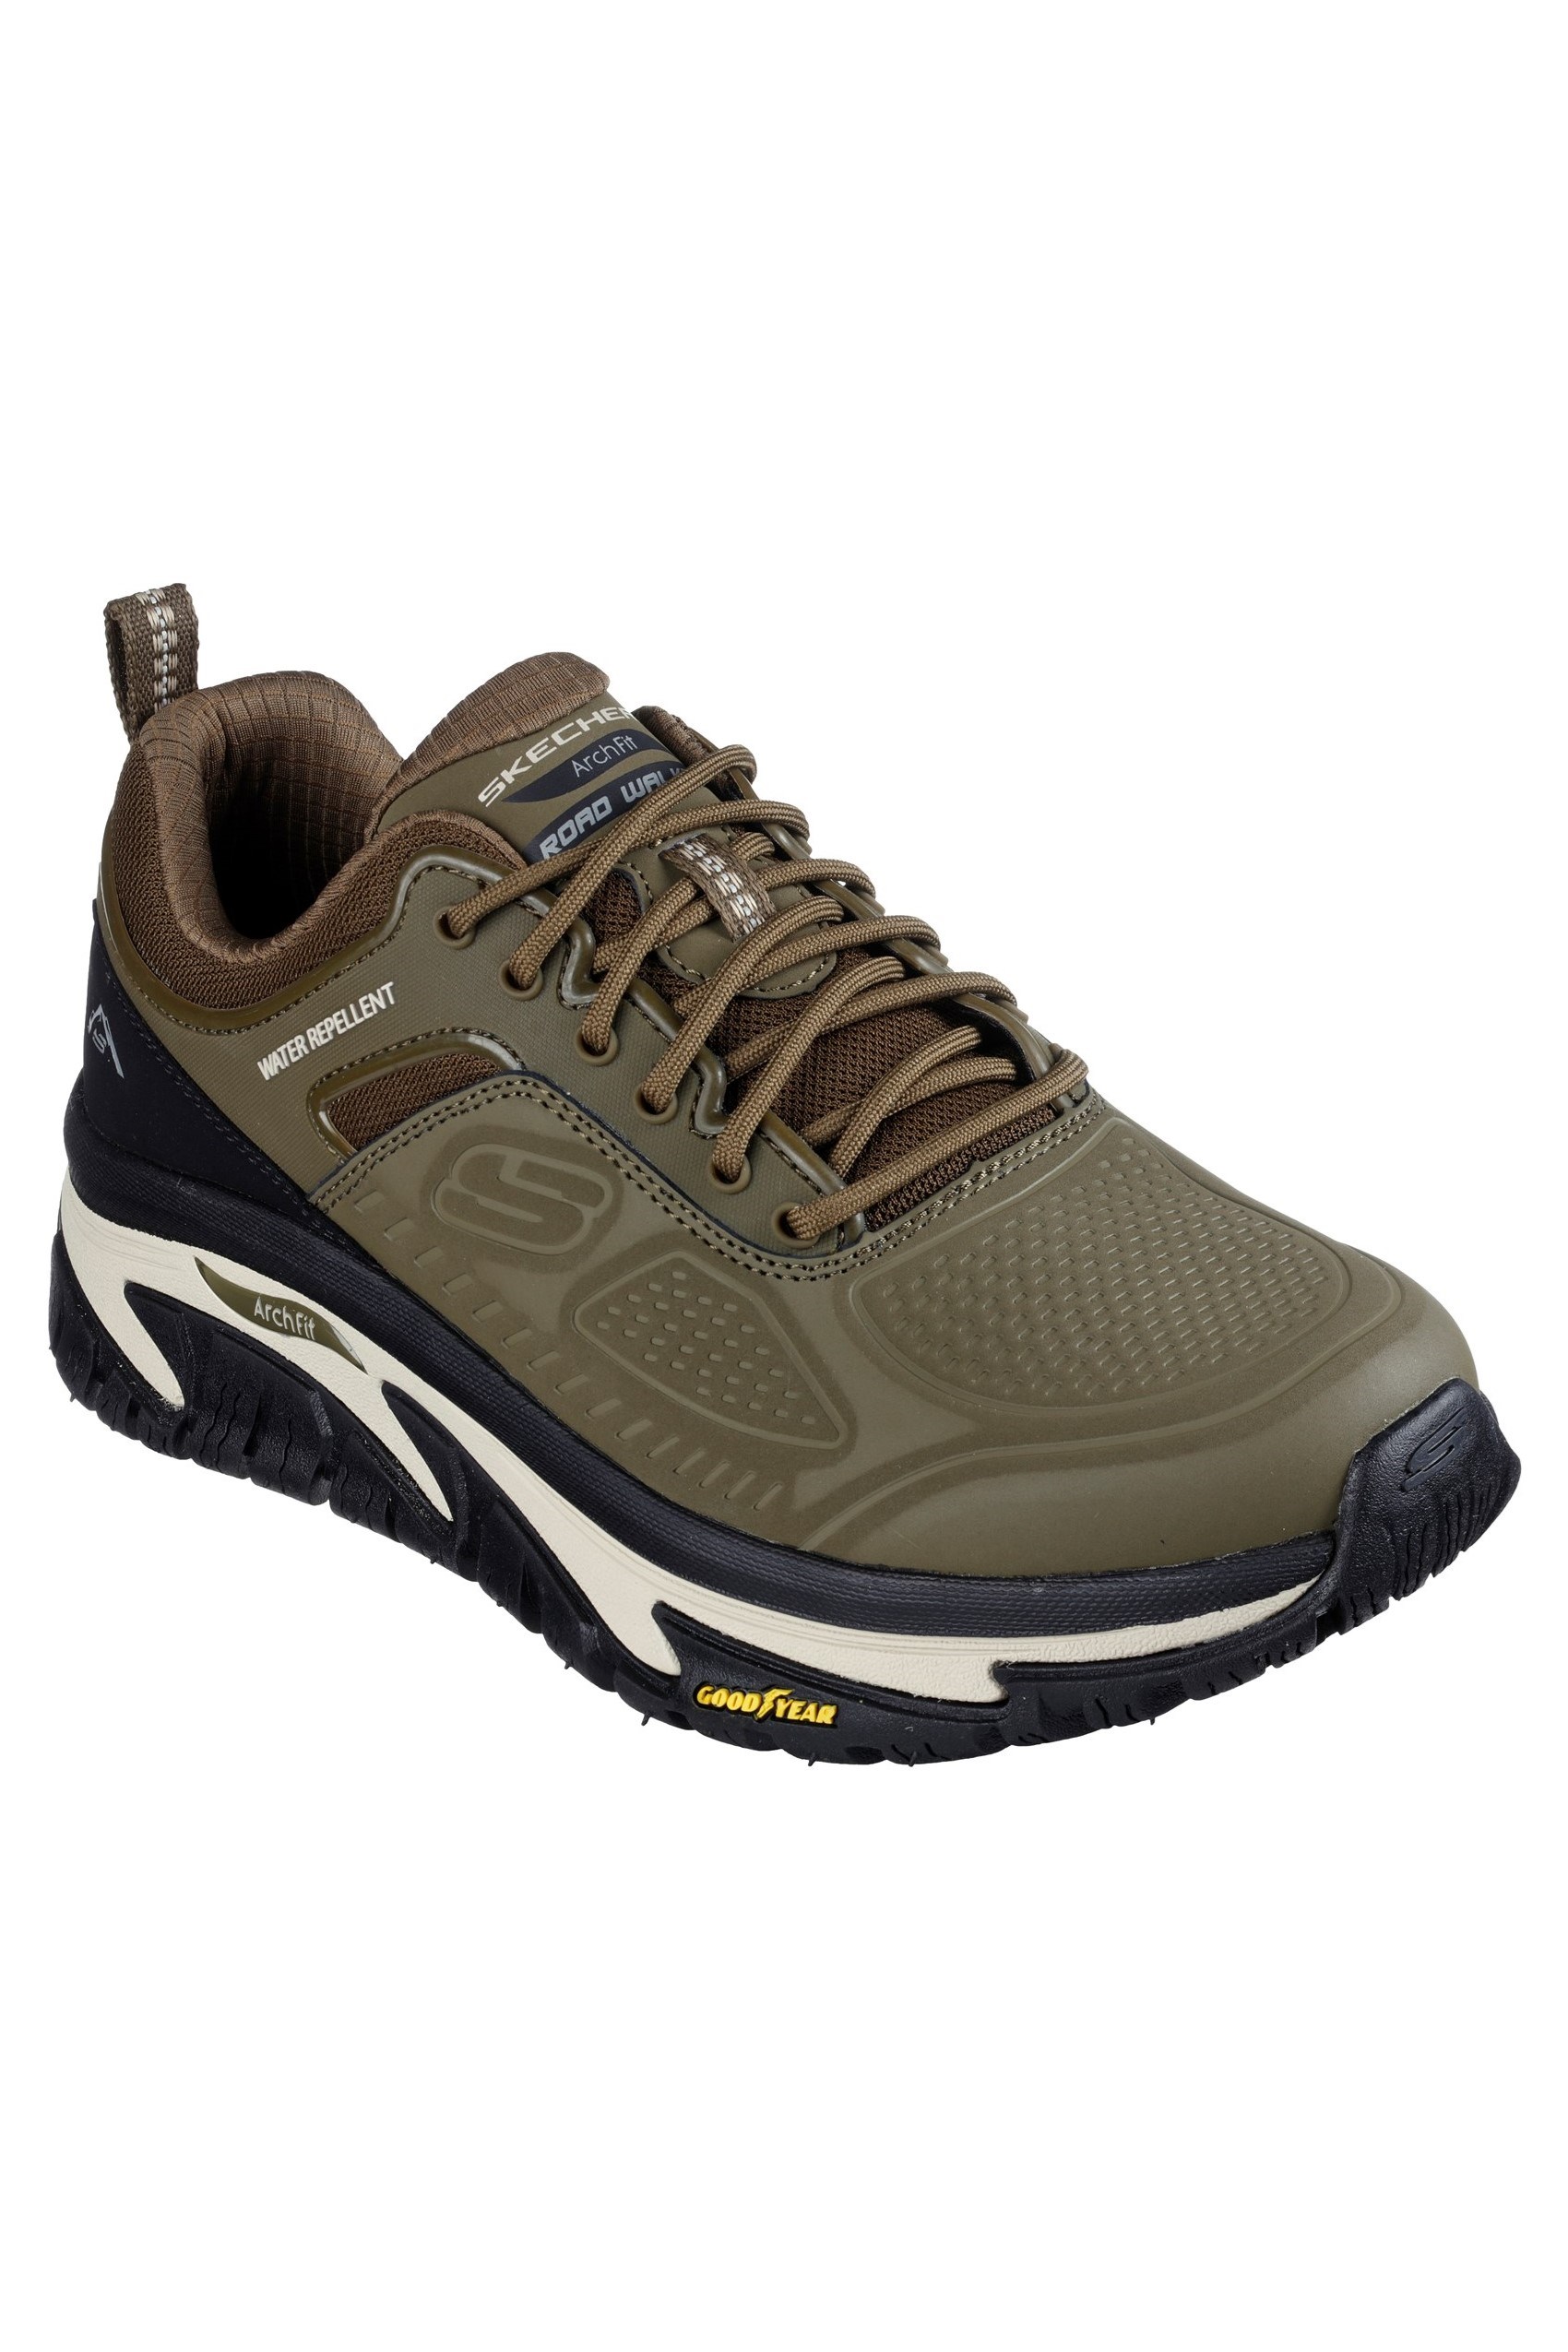 Arch Fit Road Walker Recon Mens Boots -